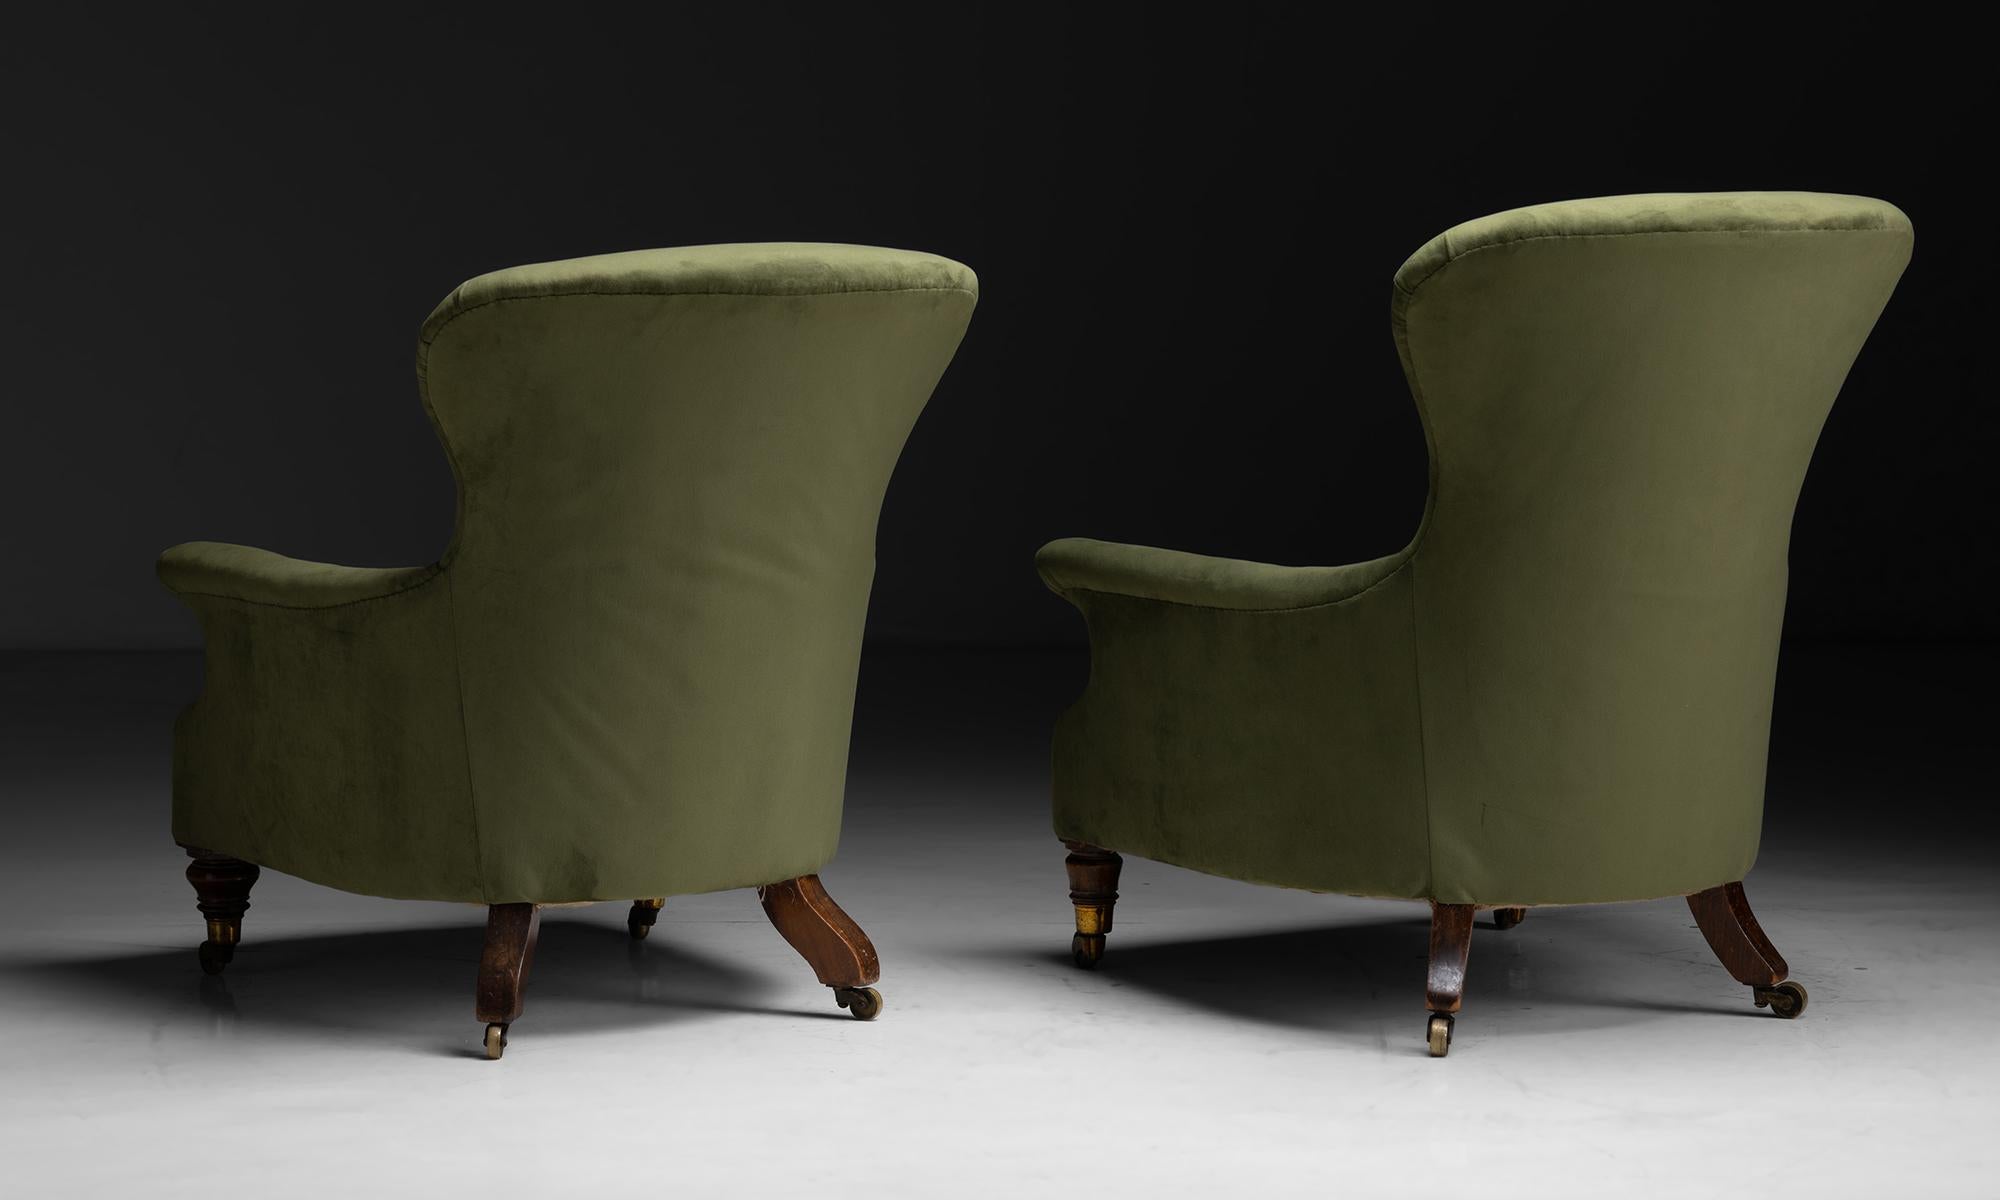 Brass Pair of Library Chairs in Velvet, England, circa 1910